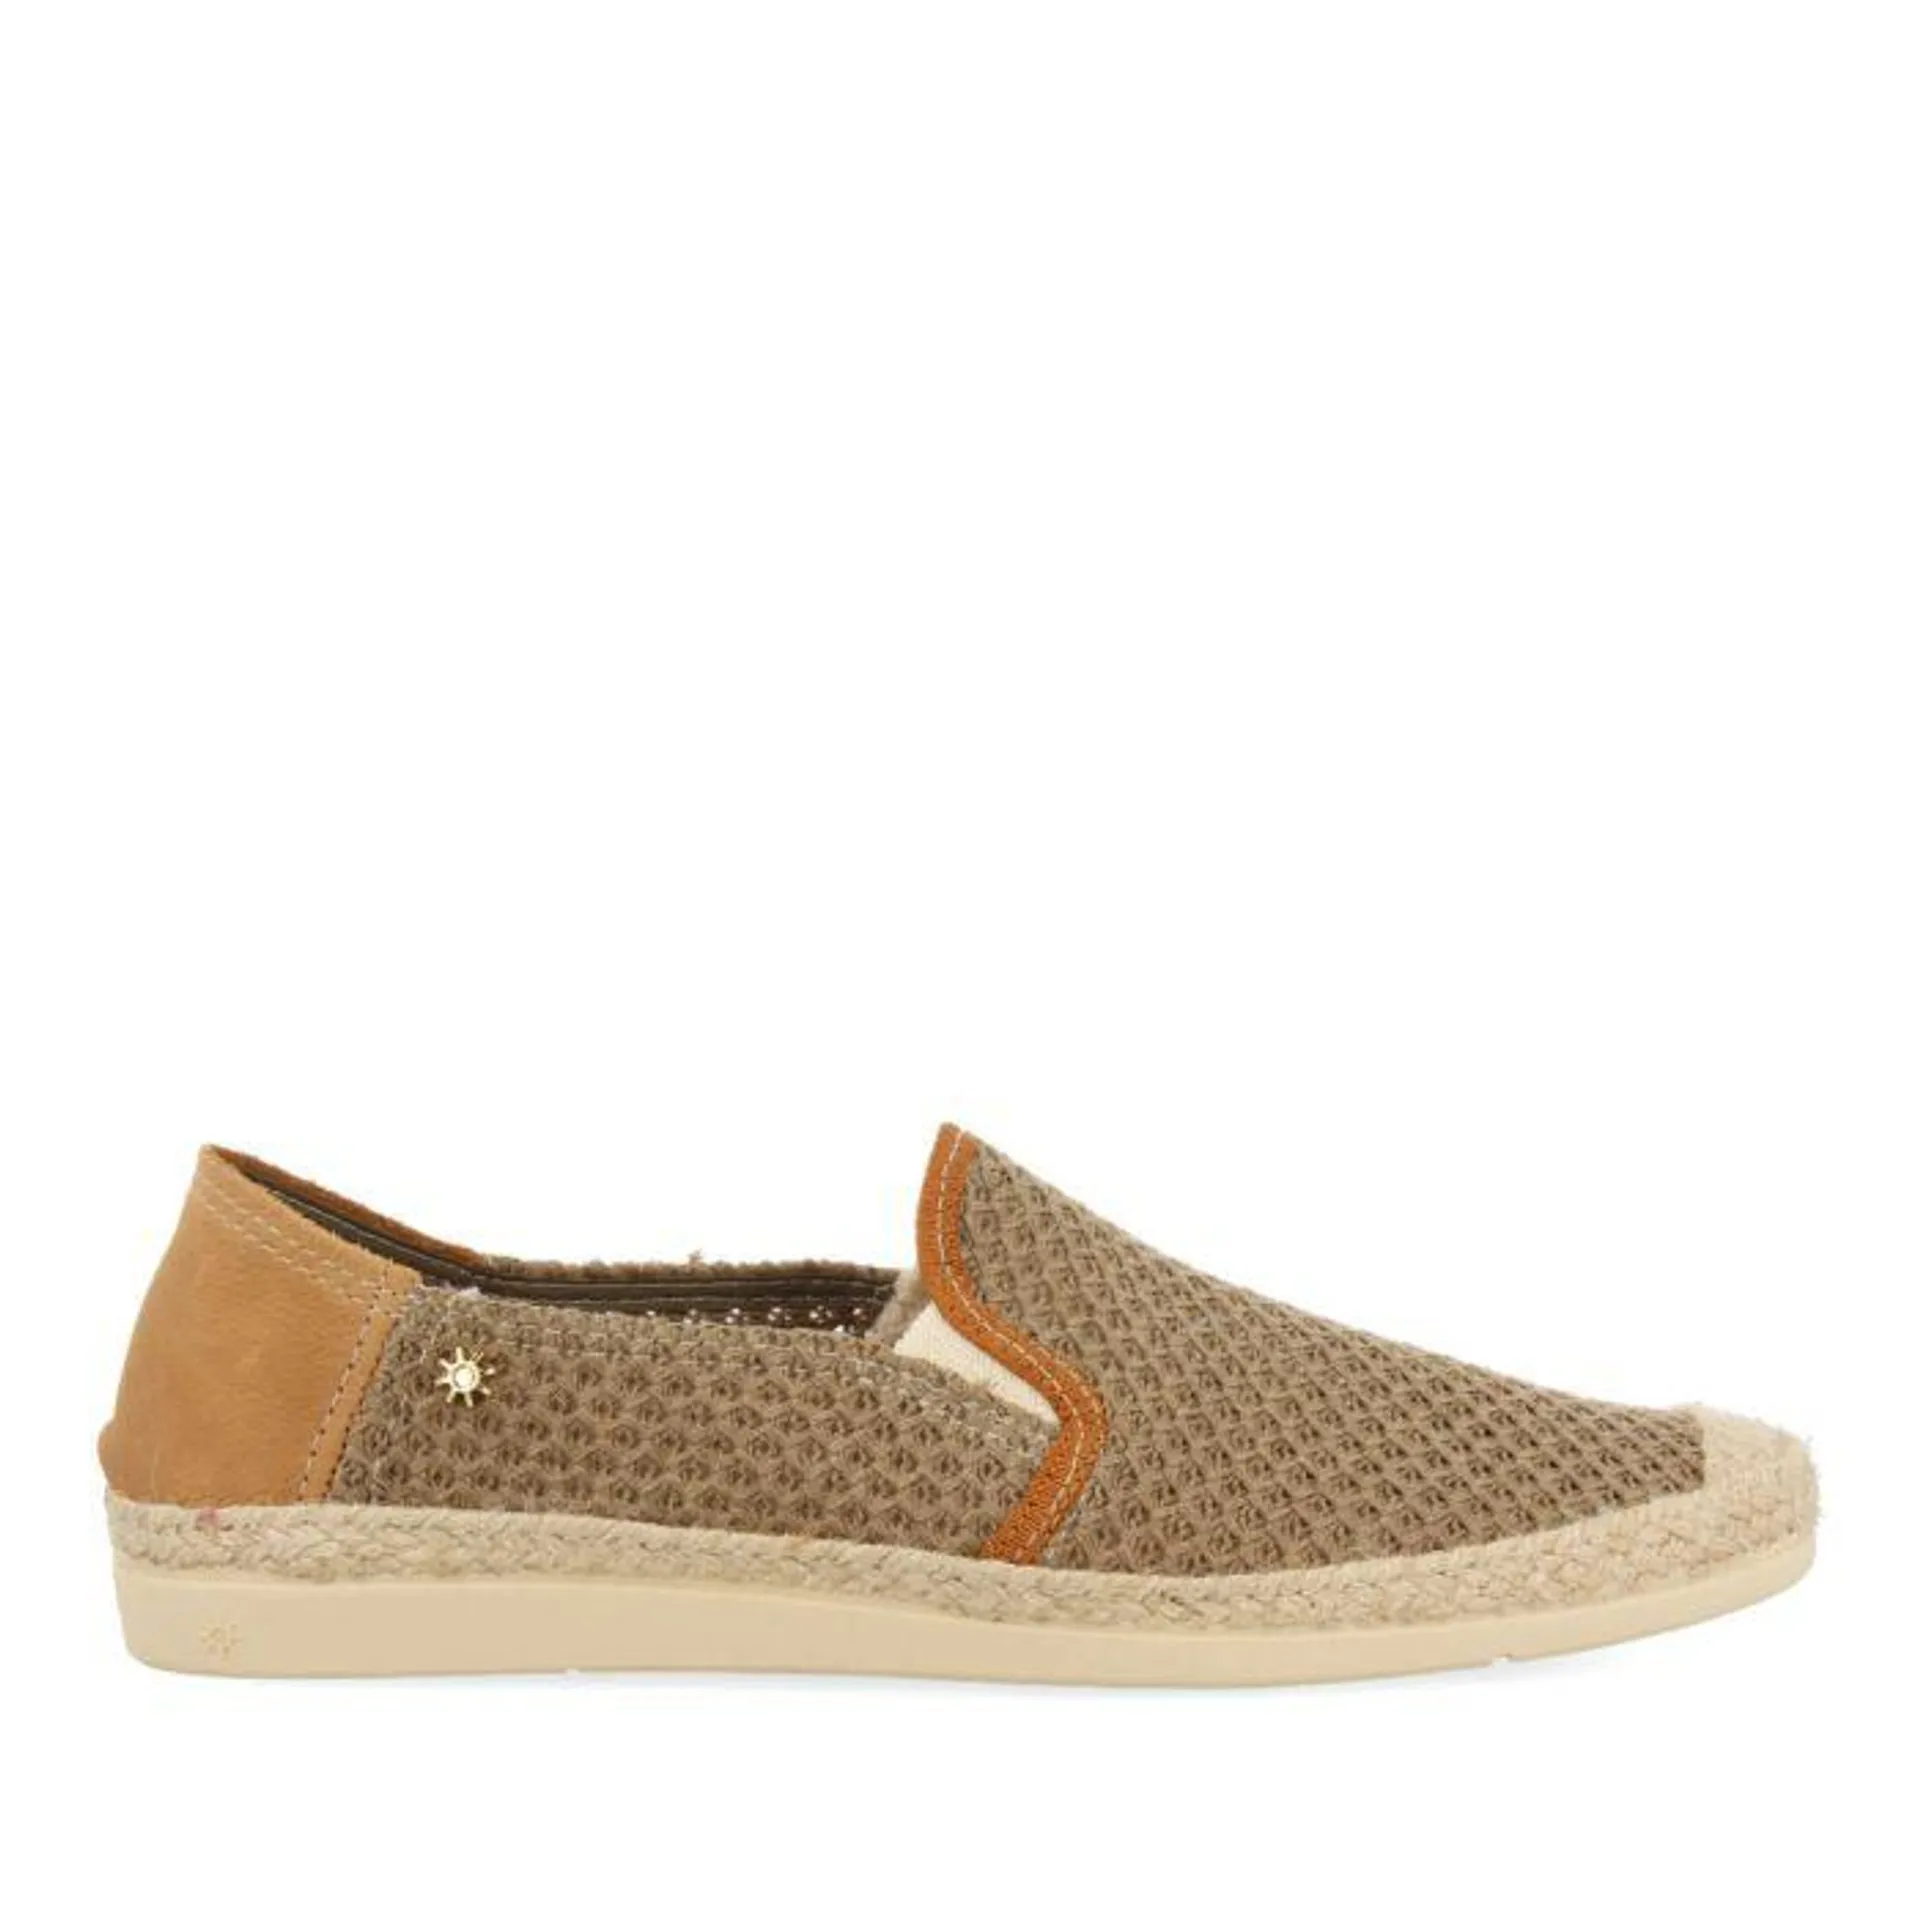 BROWN LA SIESTA ESPADRILLES WITH RECYCLED COTTON FOR MAN SARDINAL